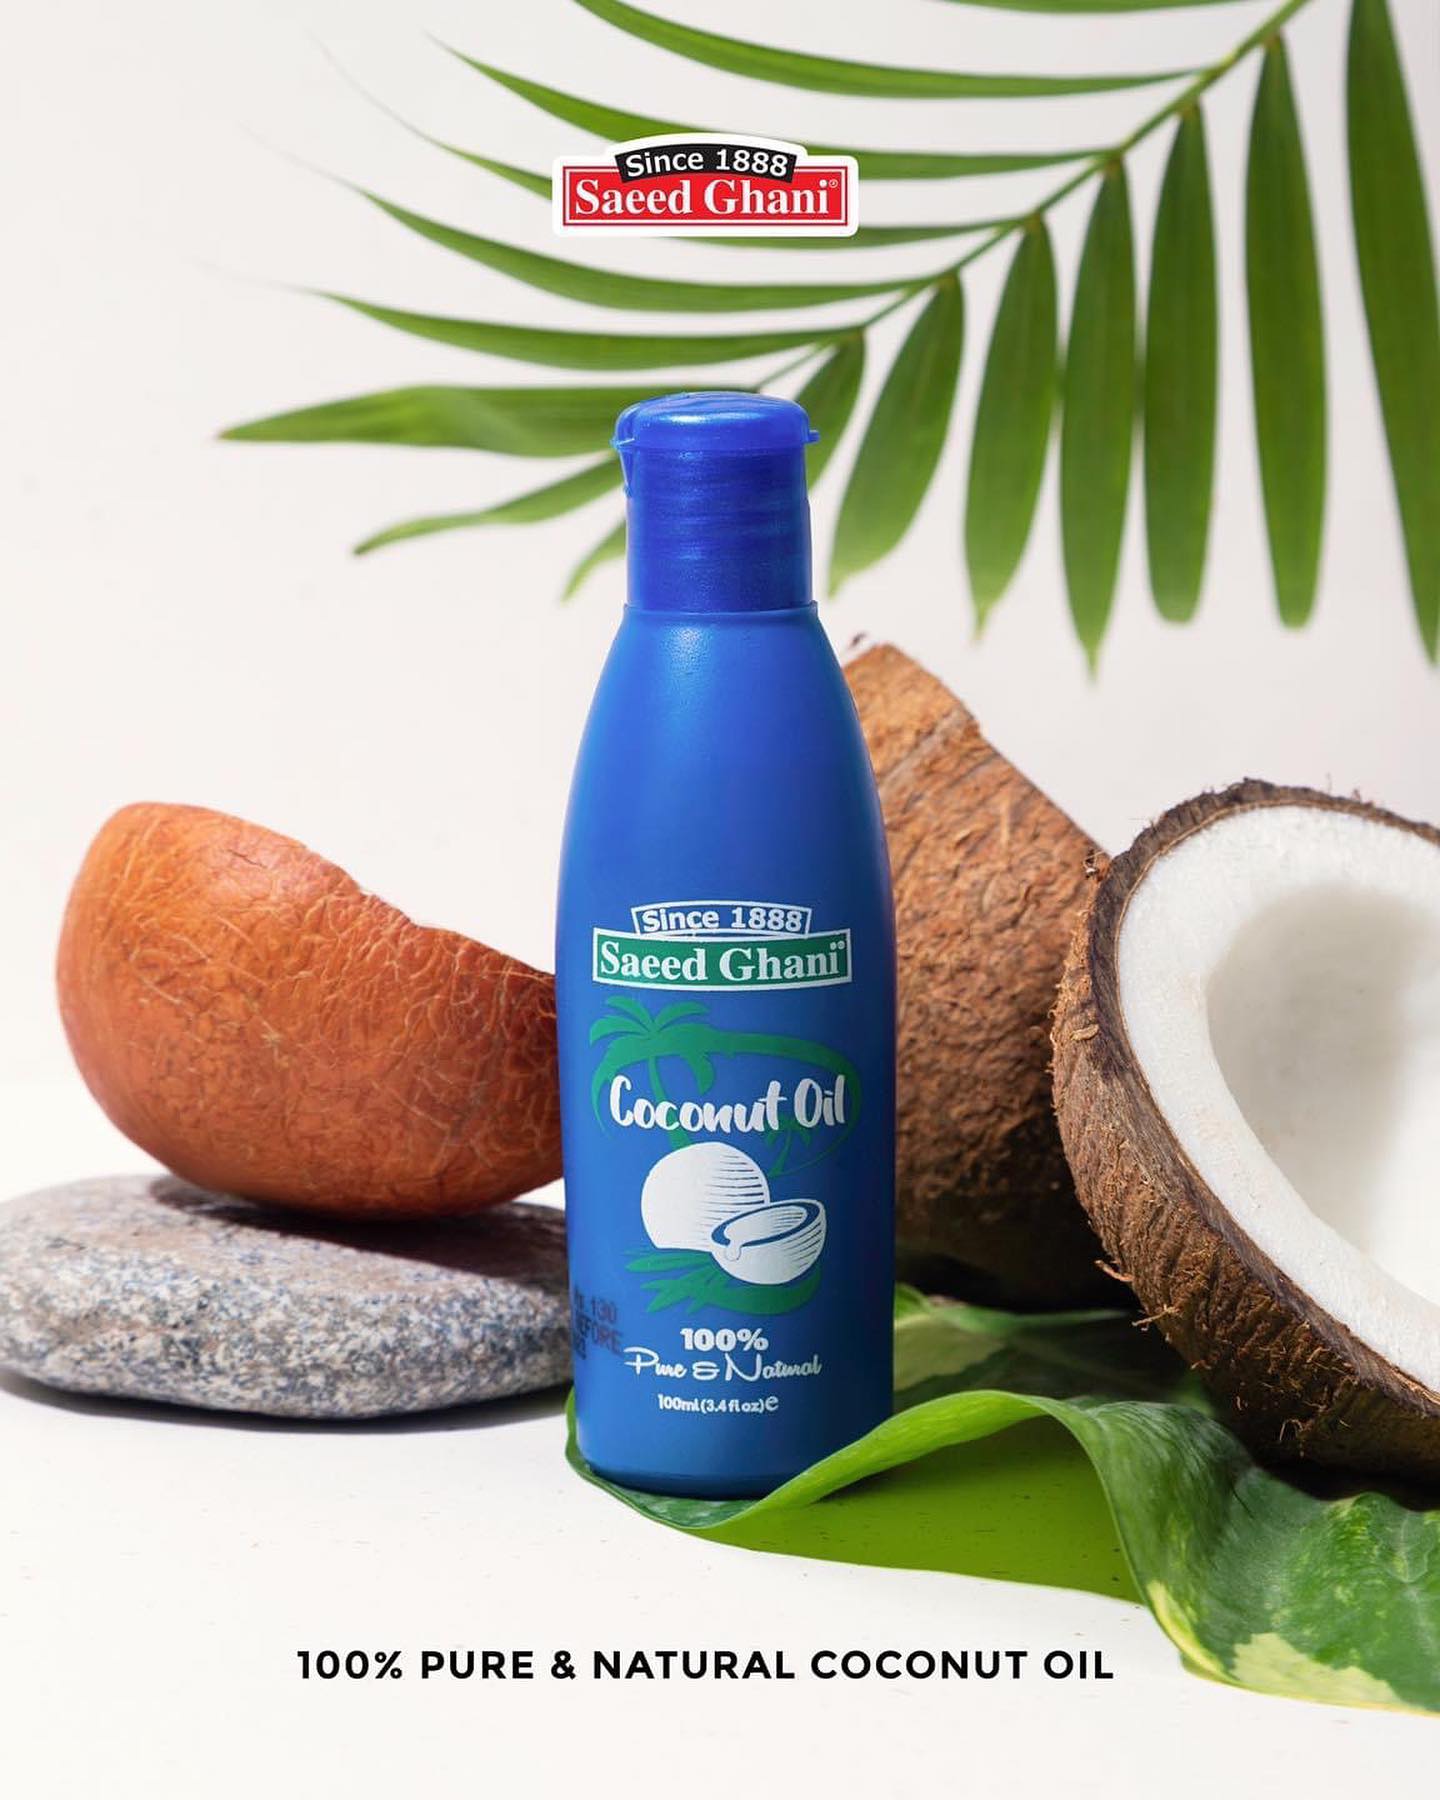 Buy Saeed Ghani Coconut Oil Online - Novelty Cosmetics